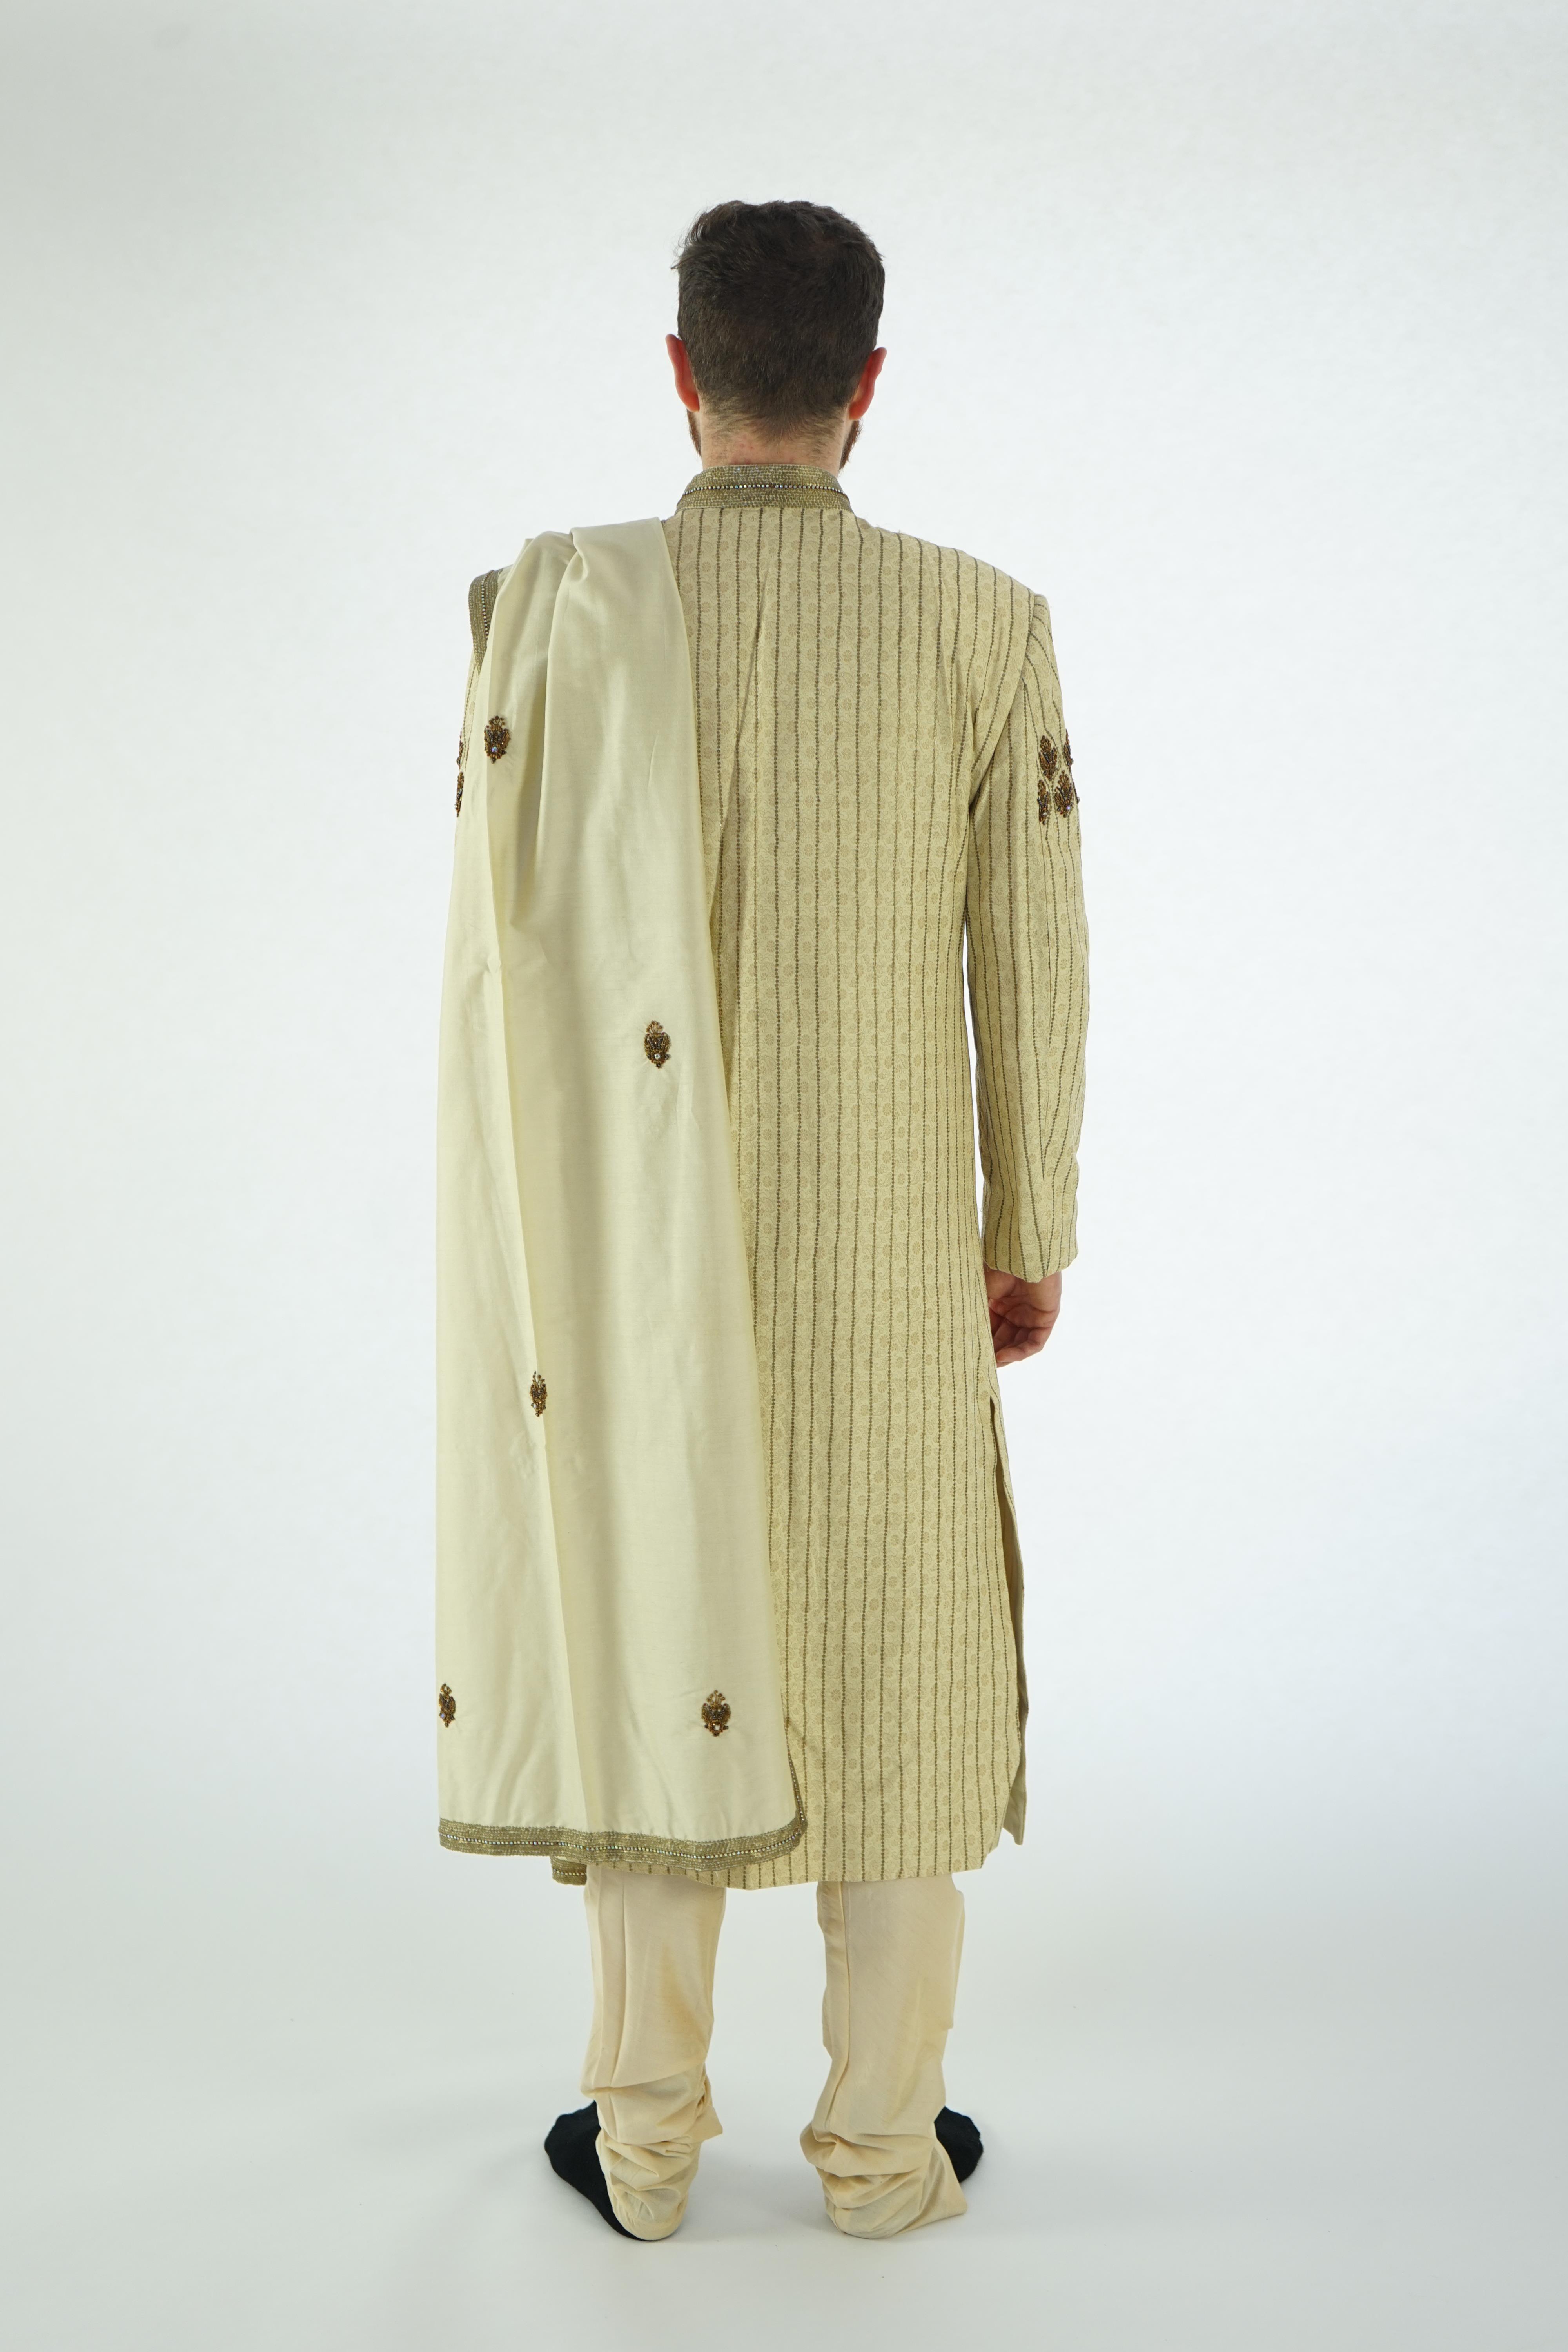 A modern Indian Men's wedding frock coat and trousers. Ex London Festival Opera - 'The Magic Flute'